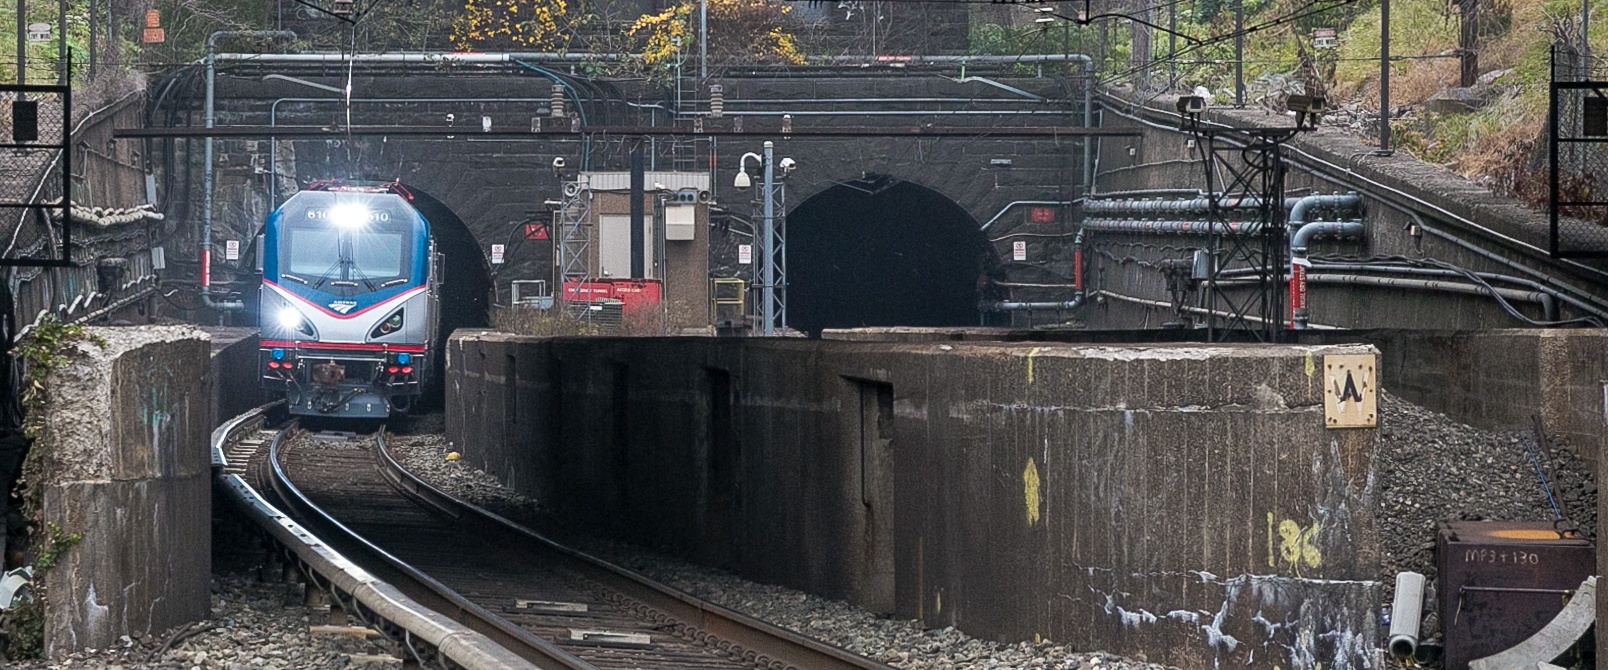 Huge amount of federal funding en route to rail bridge and tunnel